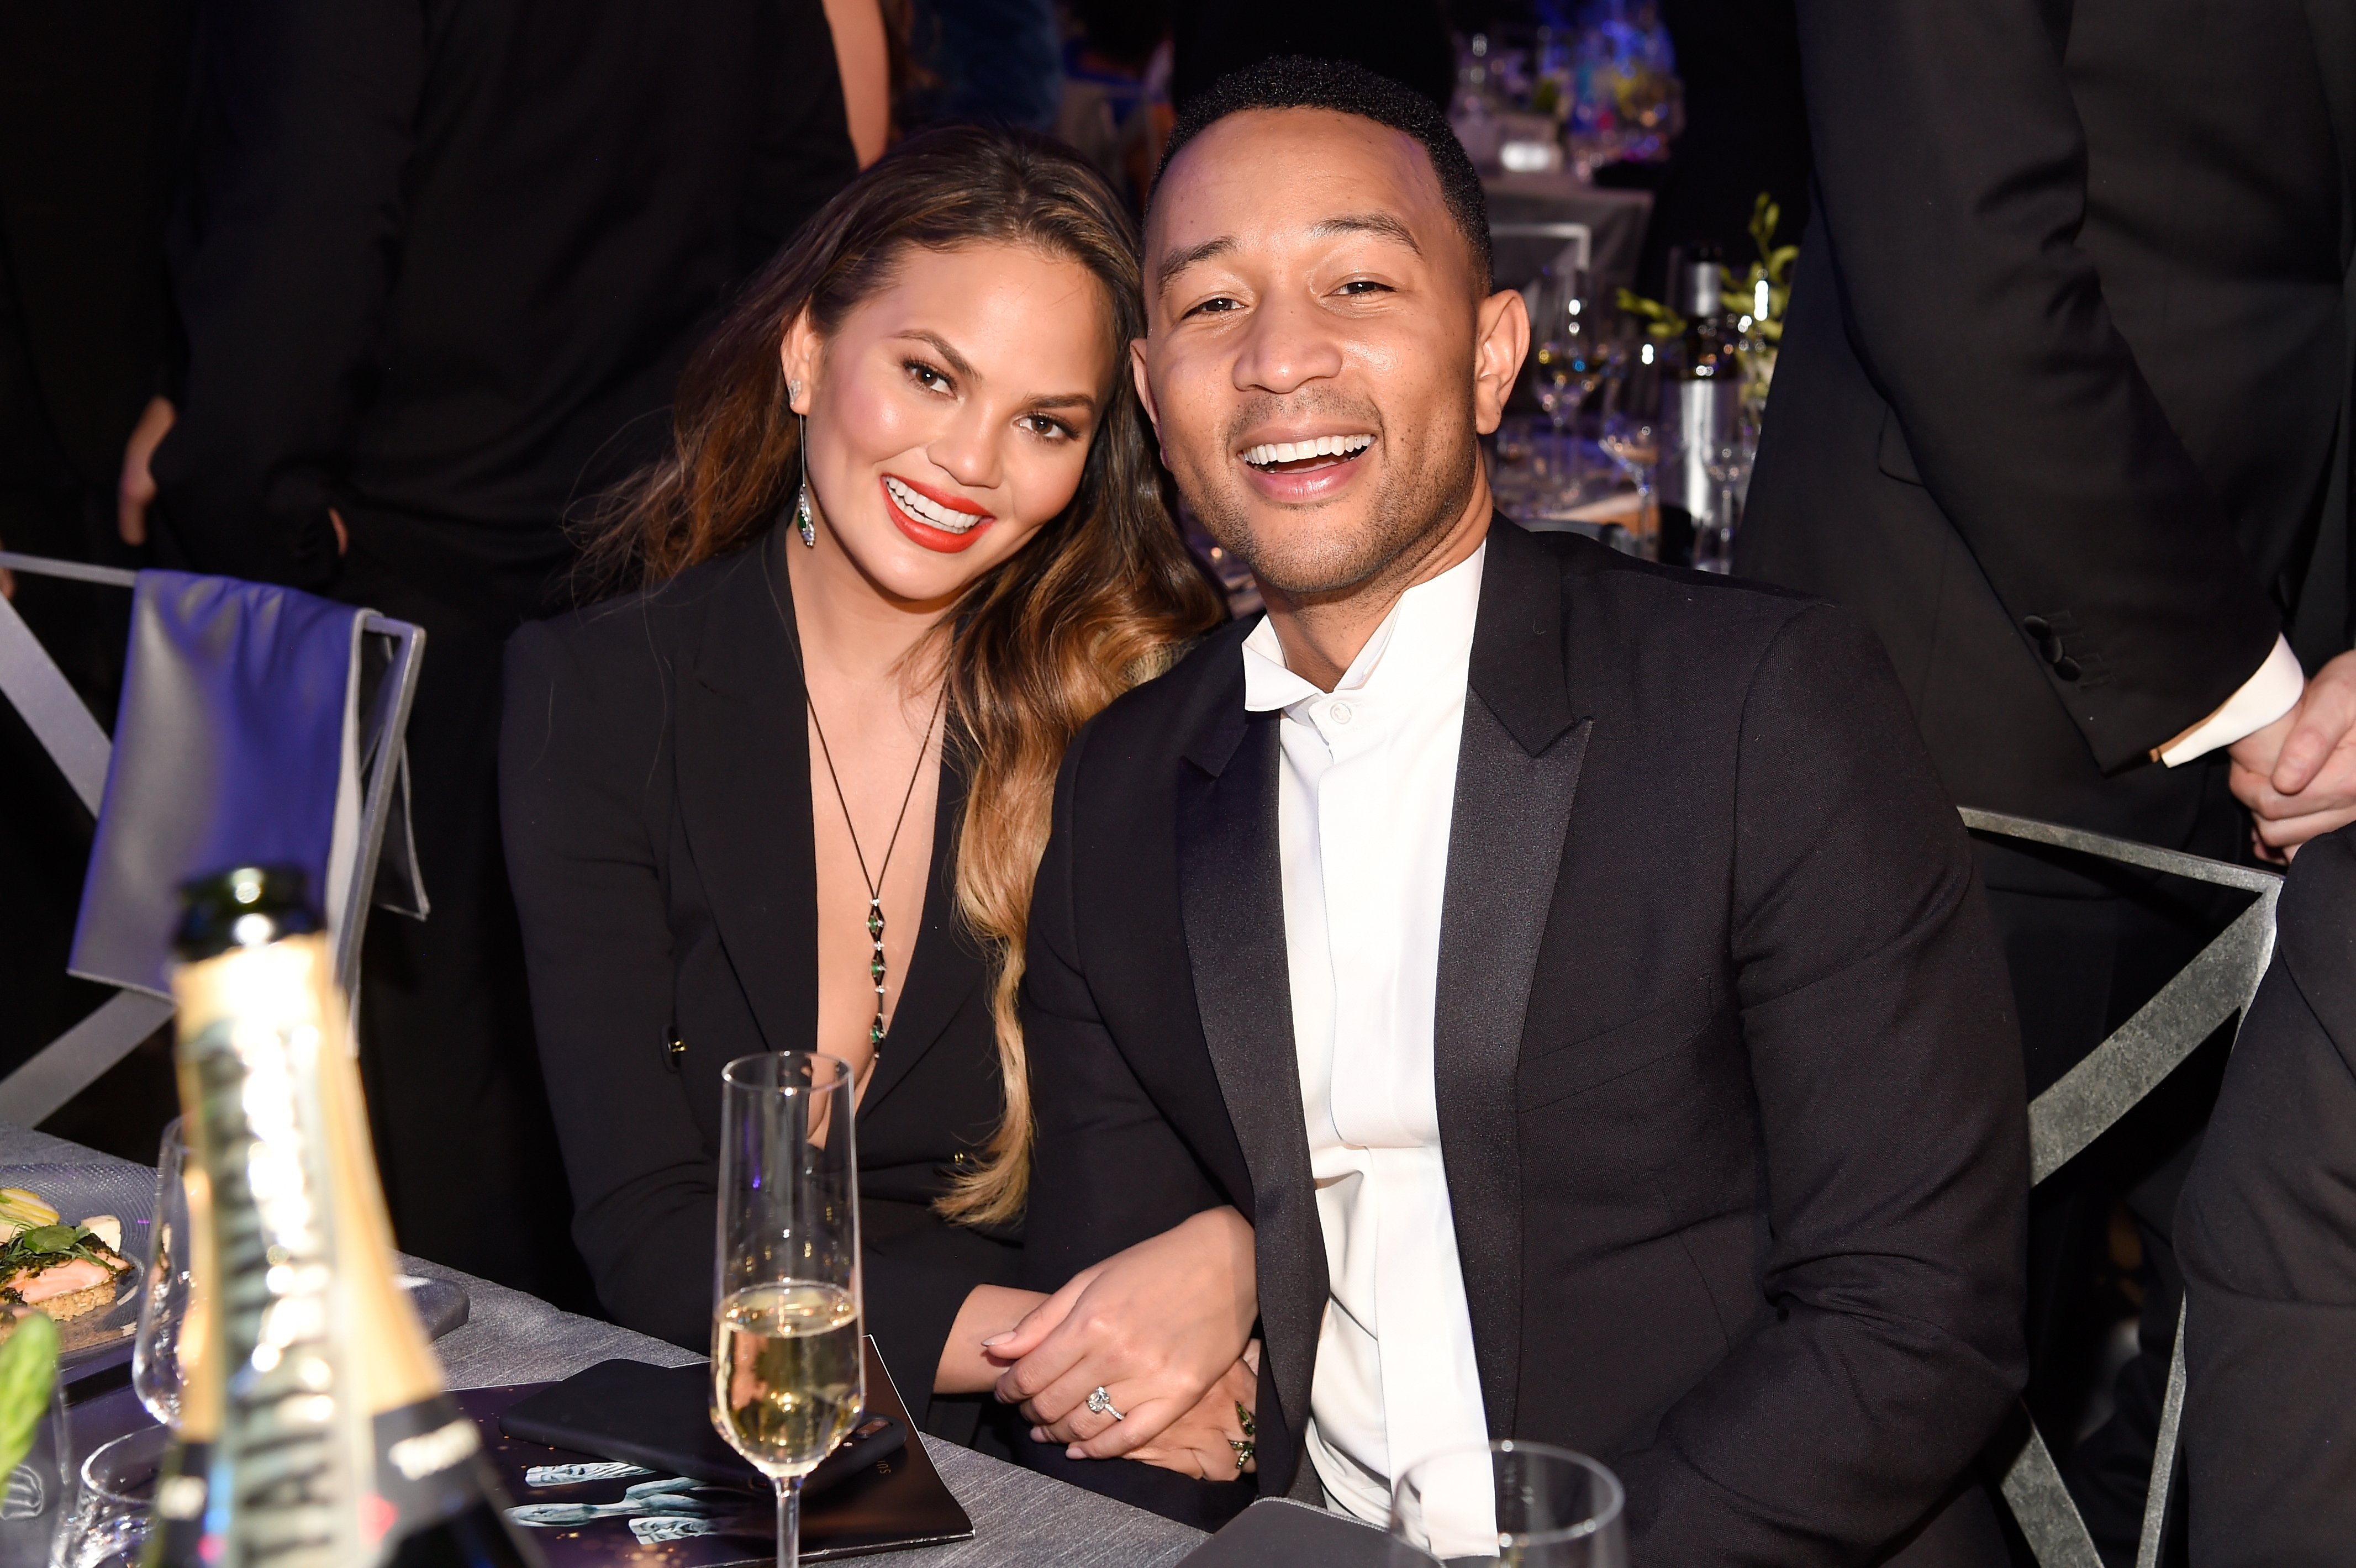 Chrissy Teigen and John Legend during The 23rd Annual Screen Actors Guild Awards at The Shrine Auditorium on January 29, 2017 . | Photo: Getty Images